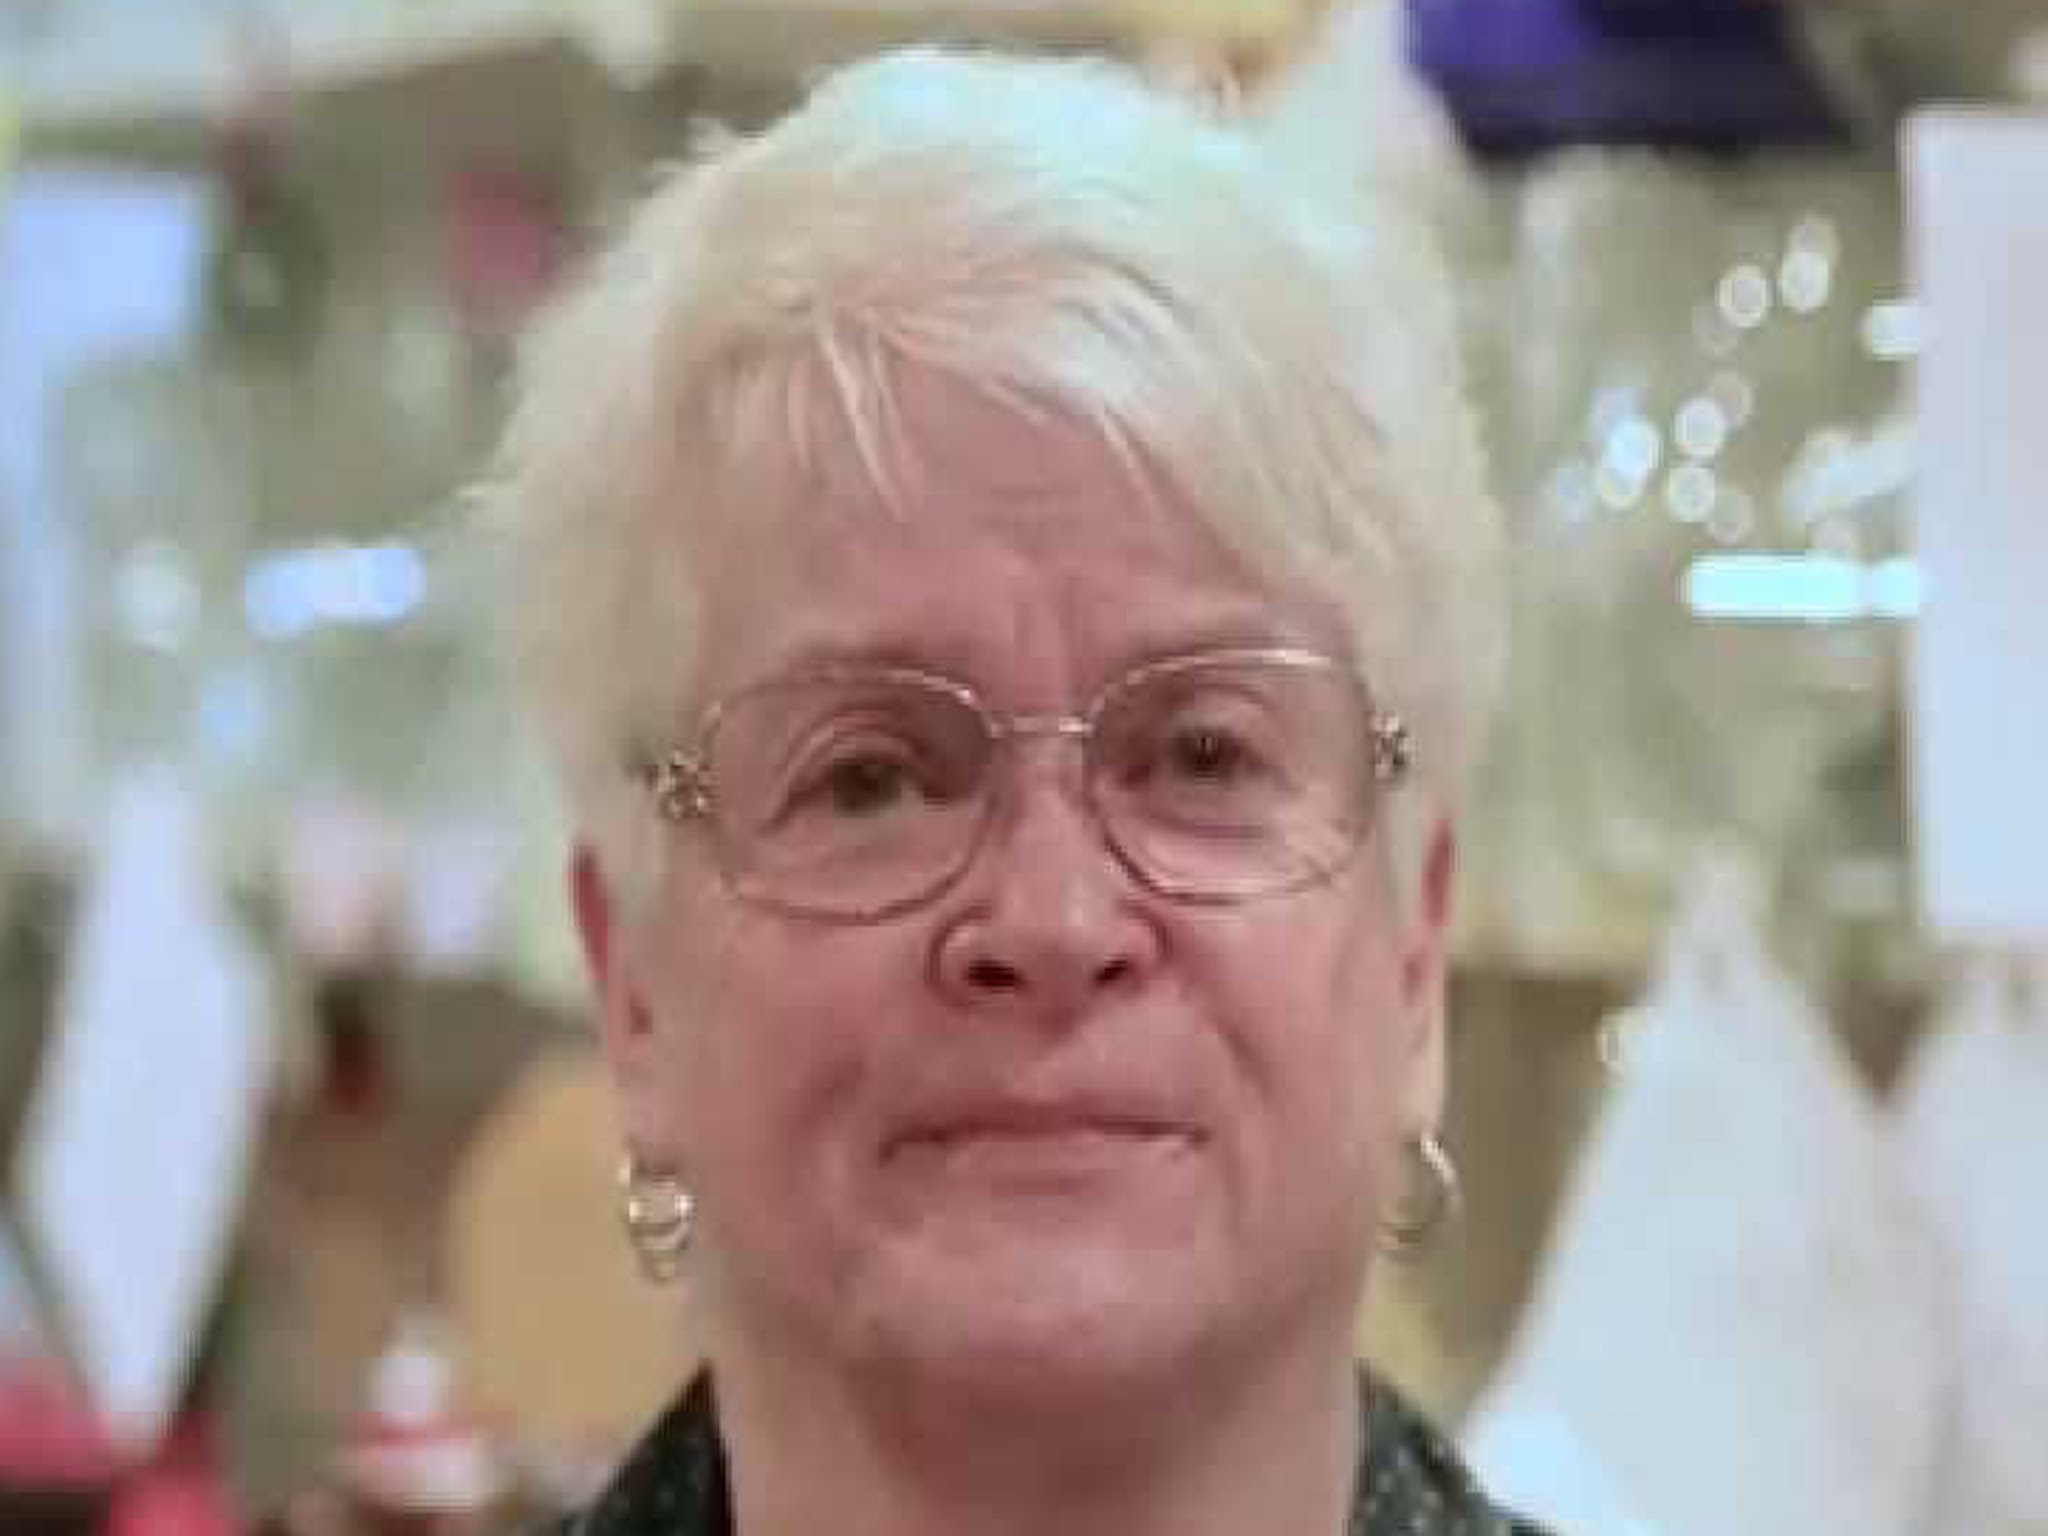 Barronelle Stutzman refused to provide flowers to a gay couple in 2013